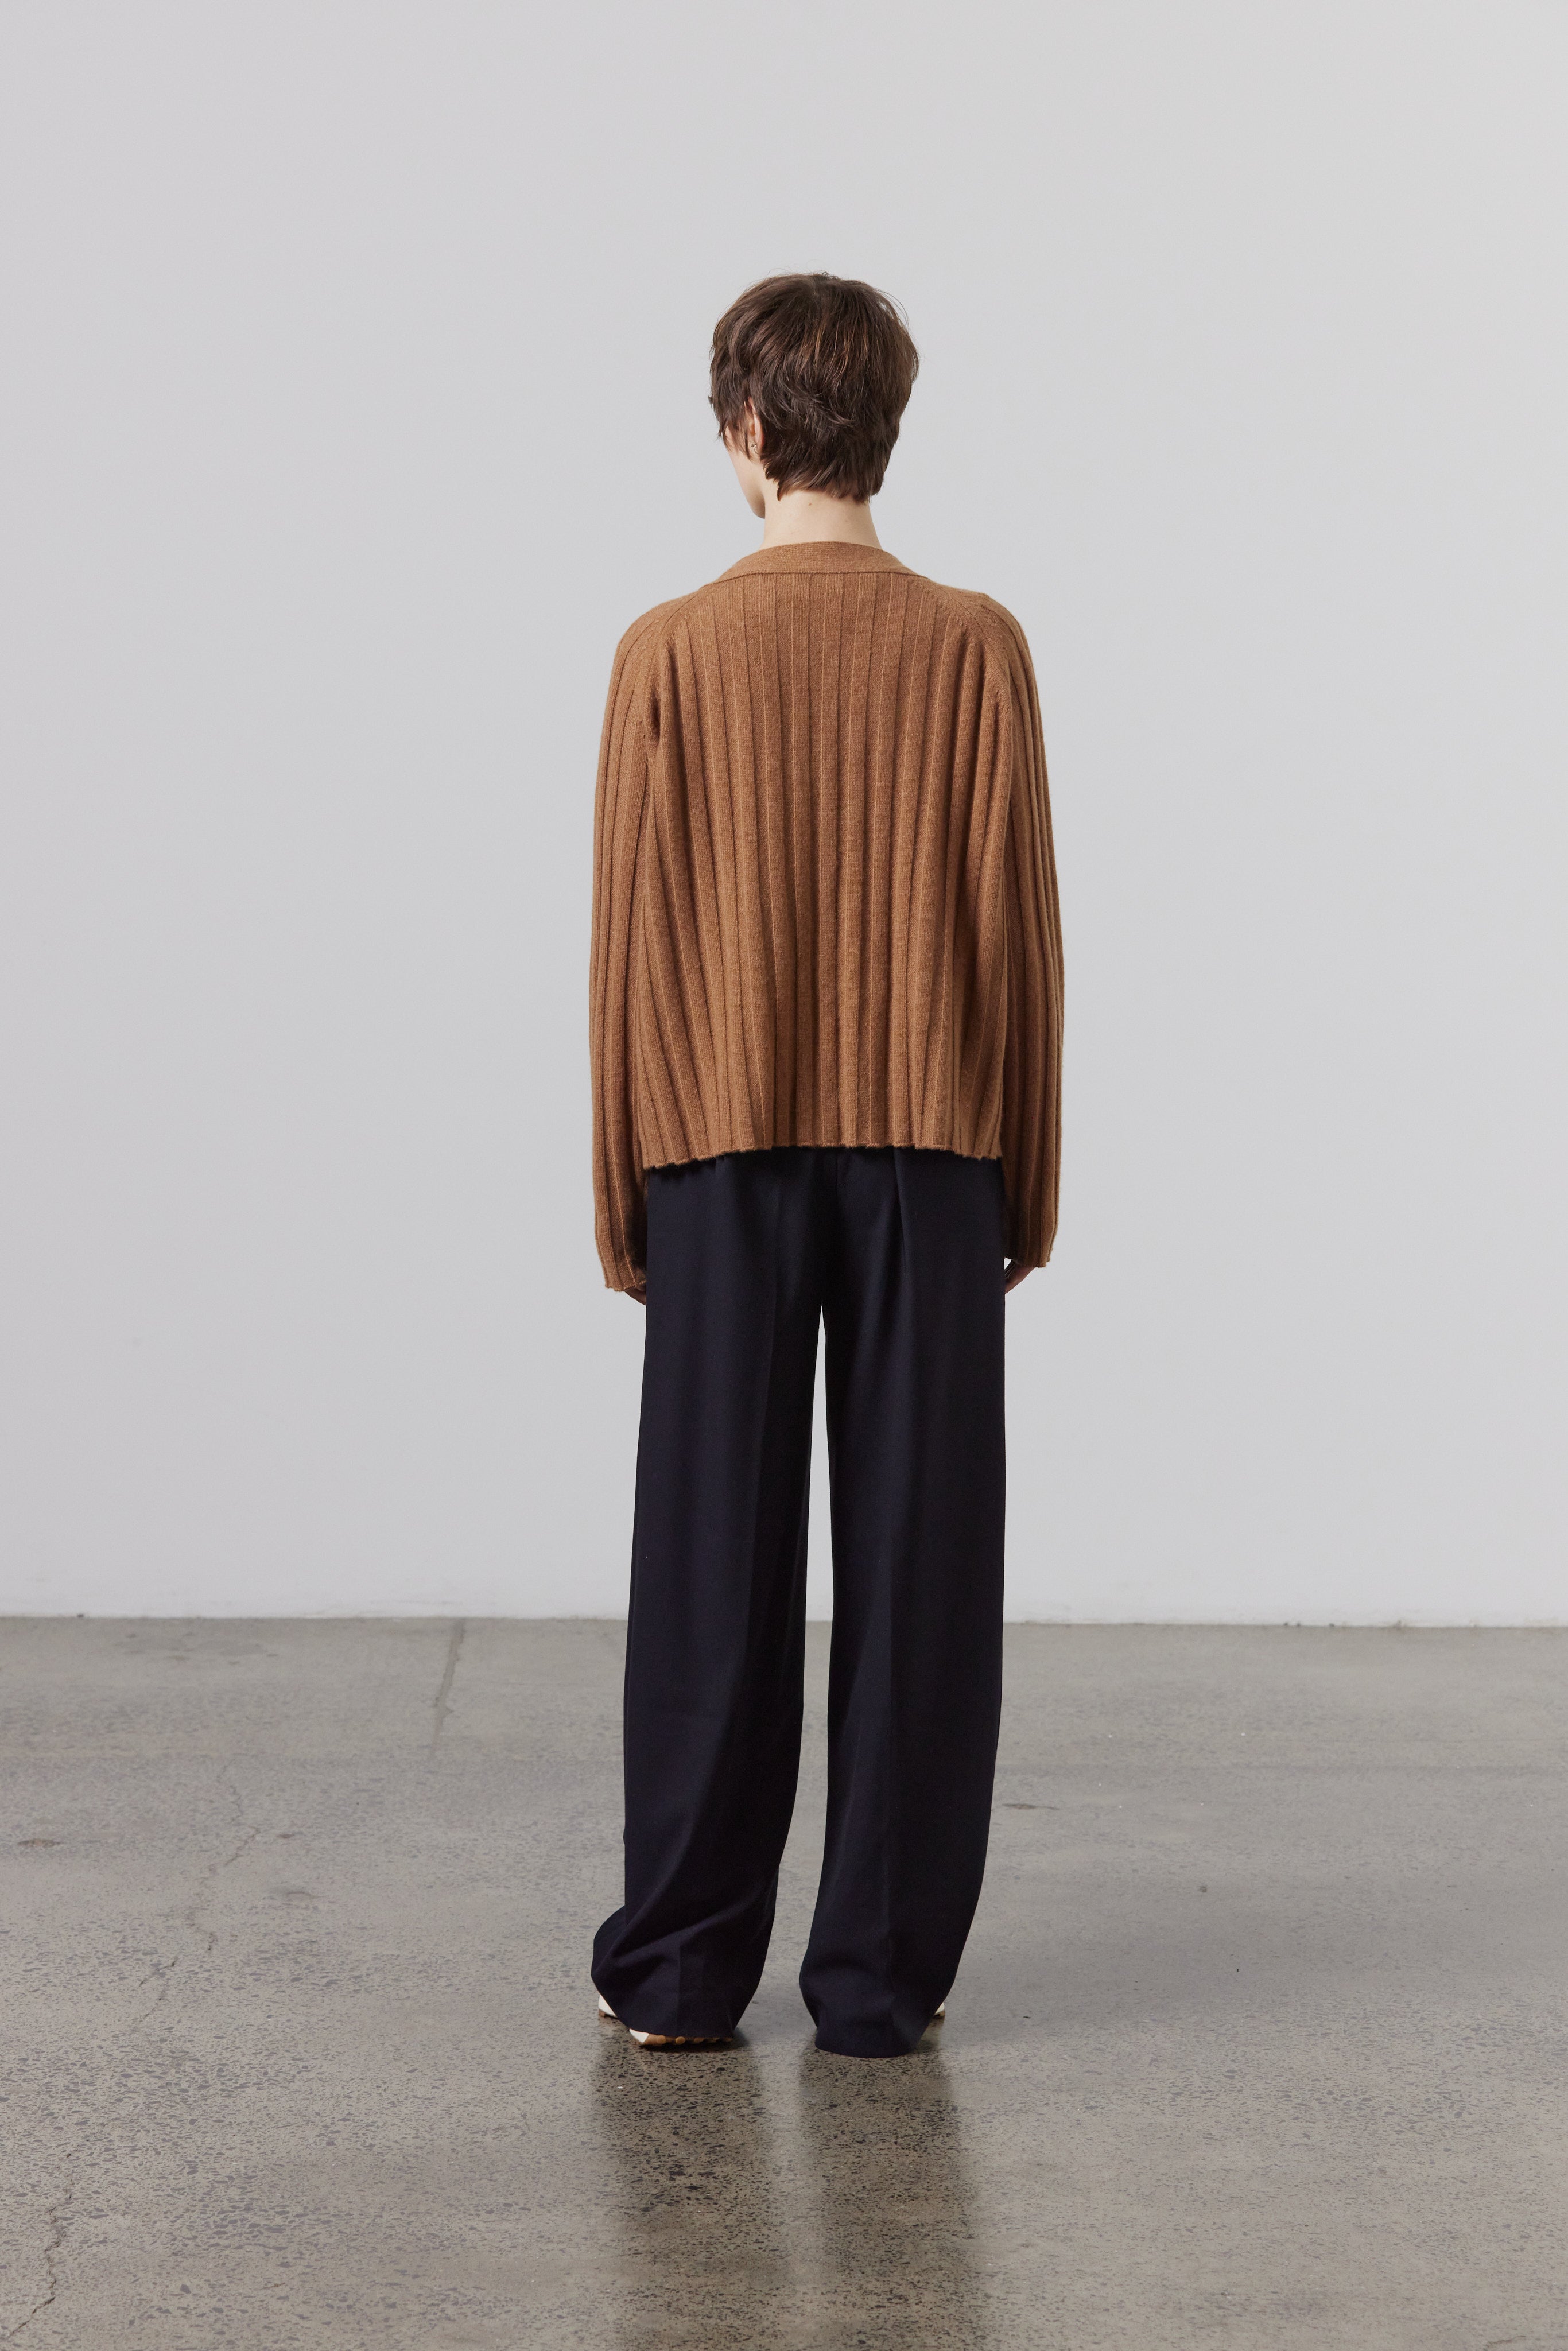 Laing | Lizzie Ribbed Cashmere Cardigan - Tan